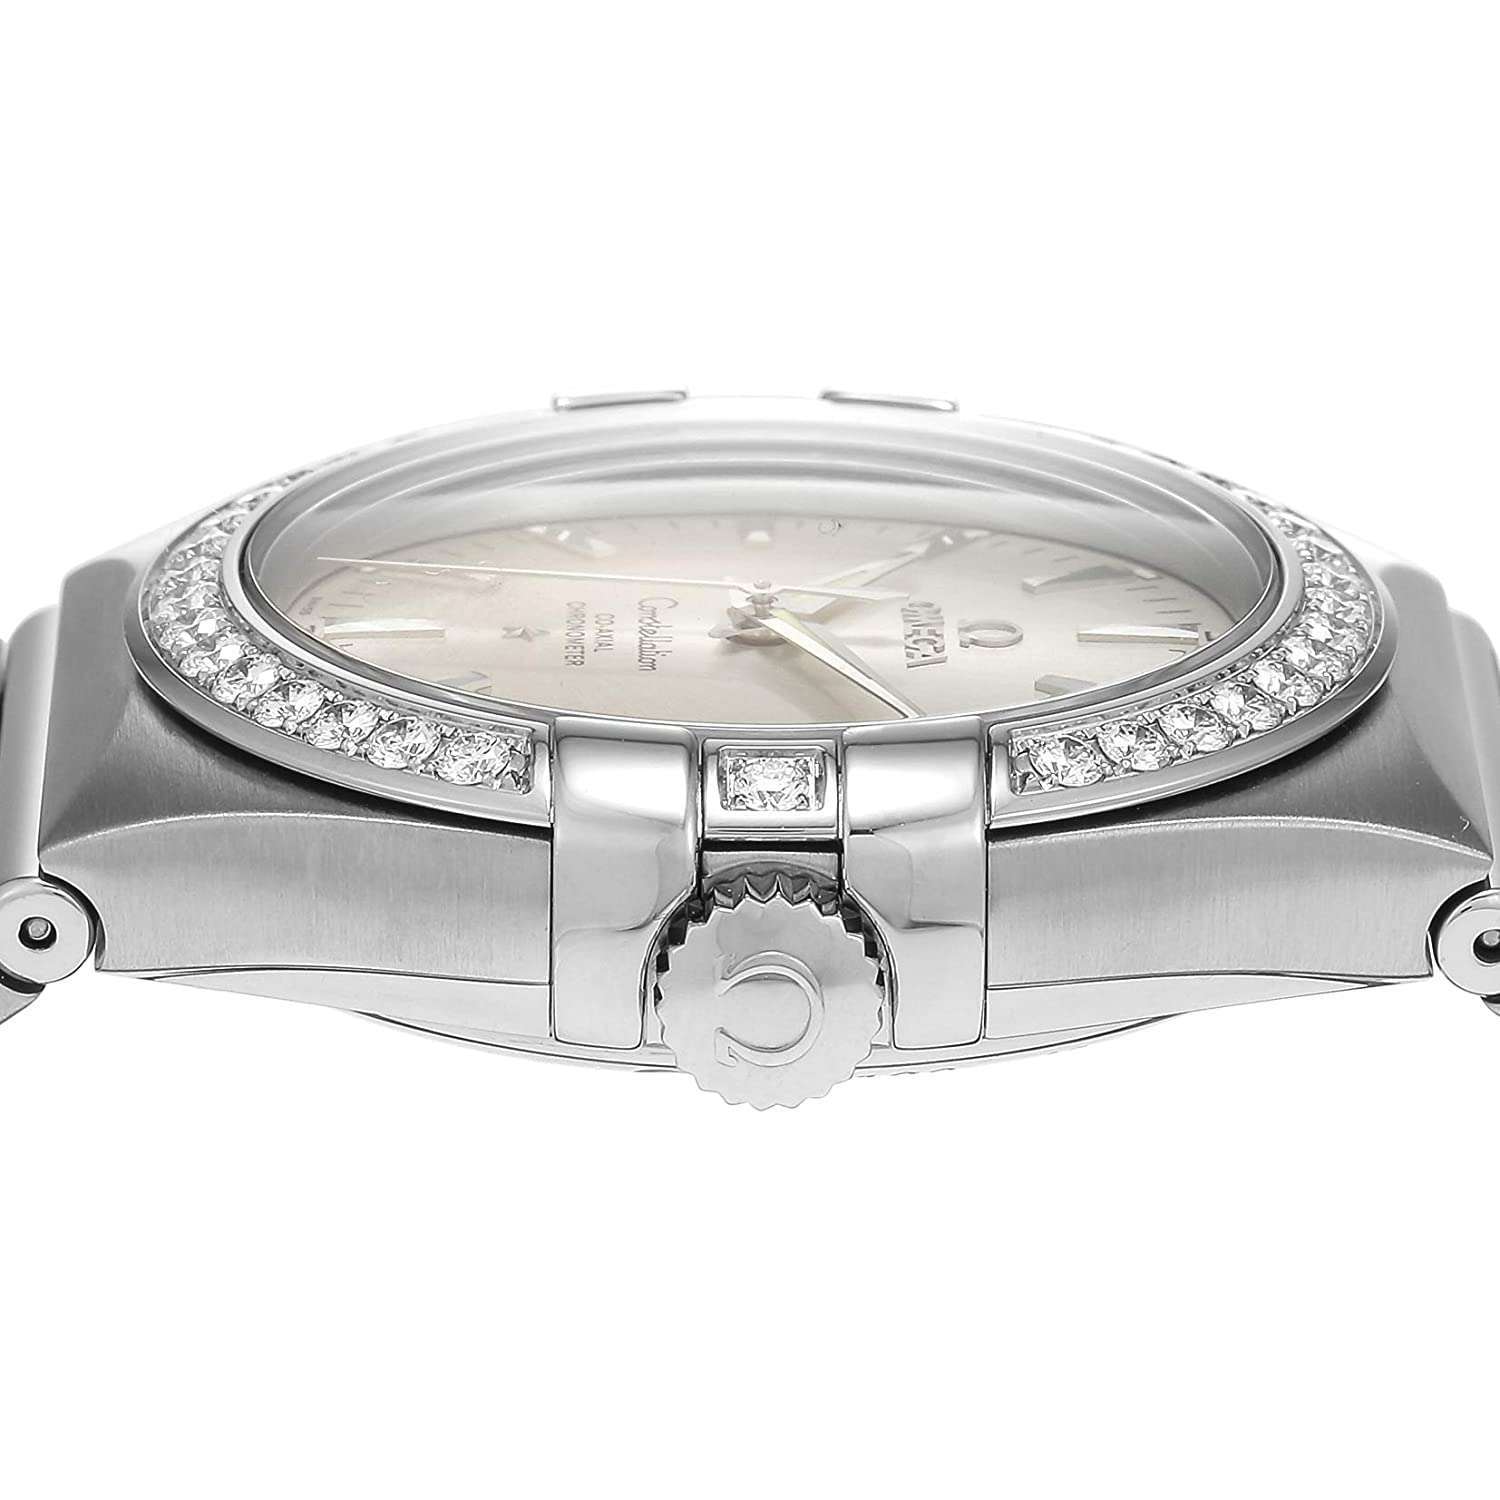 OMEGA CONSTELLATION CO‑AXIAL CHRONOMETER 40 MM WOMEN WATCH 123.15.35.20.02.001 - ROOK JAPAN